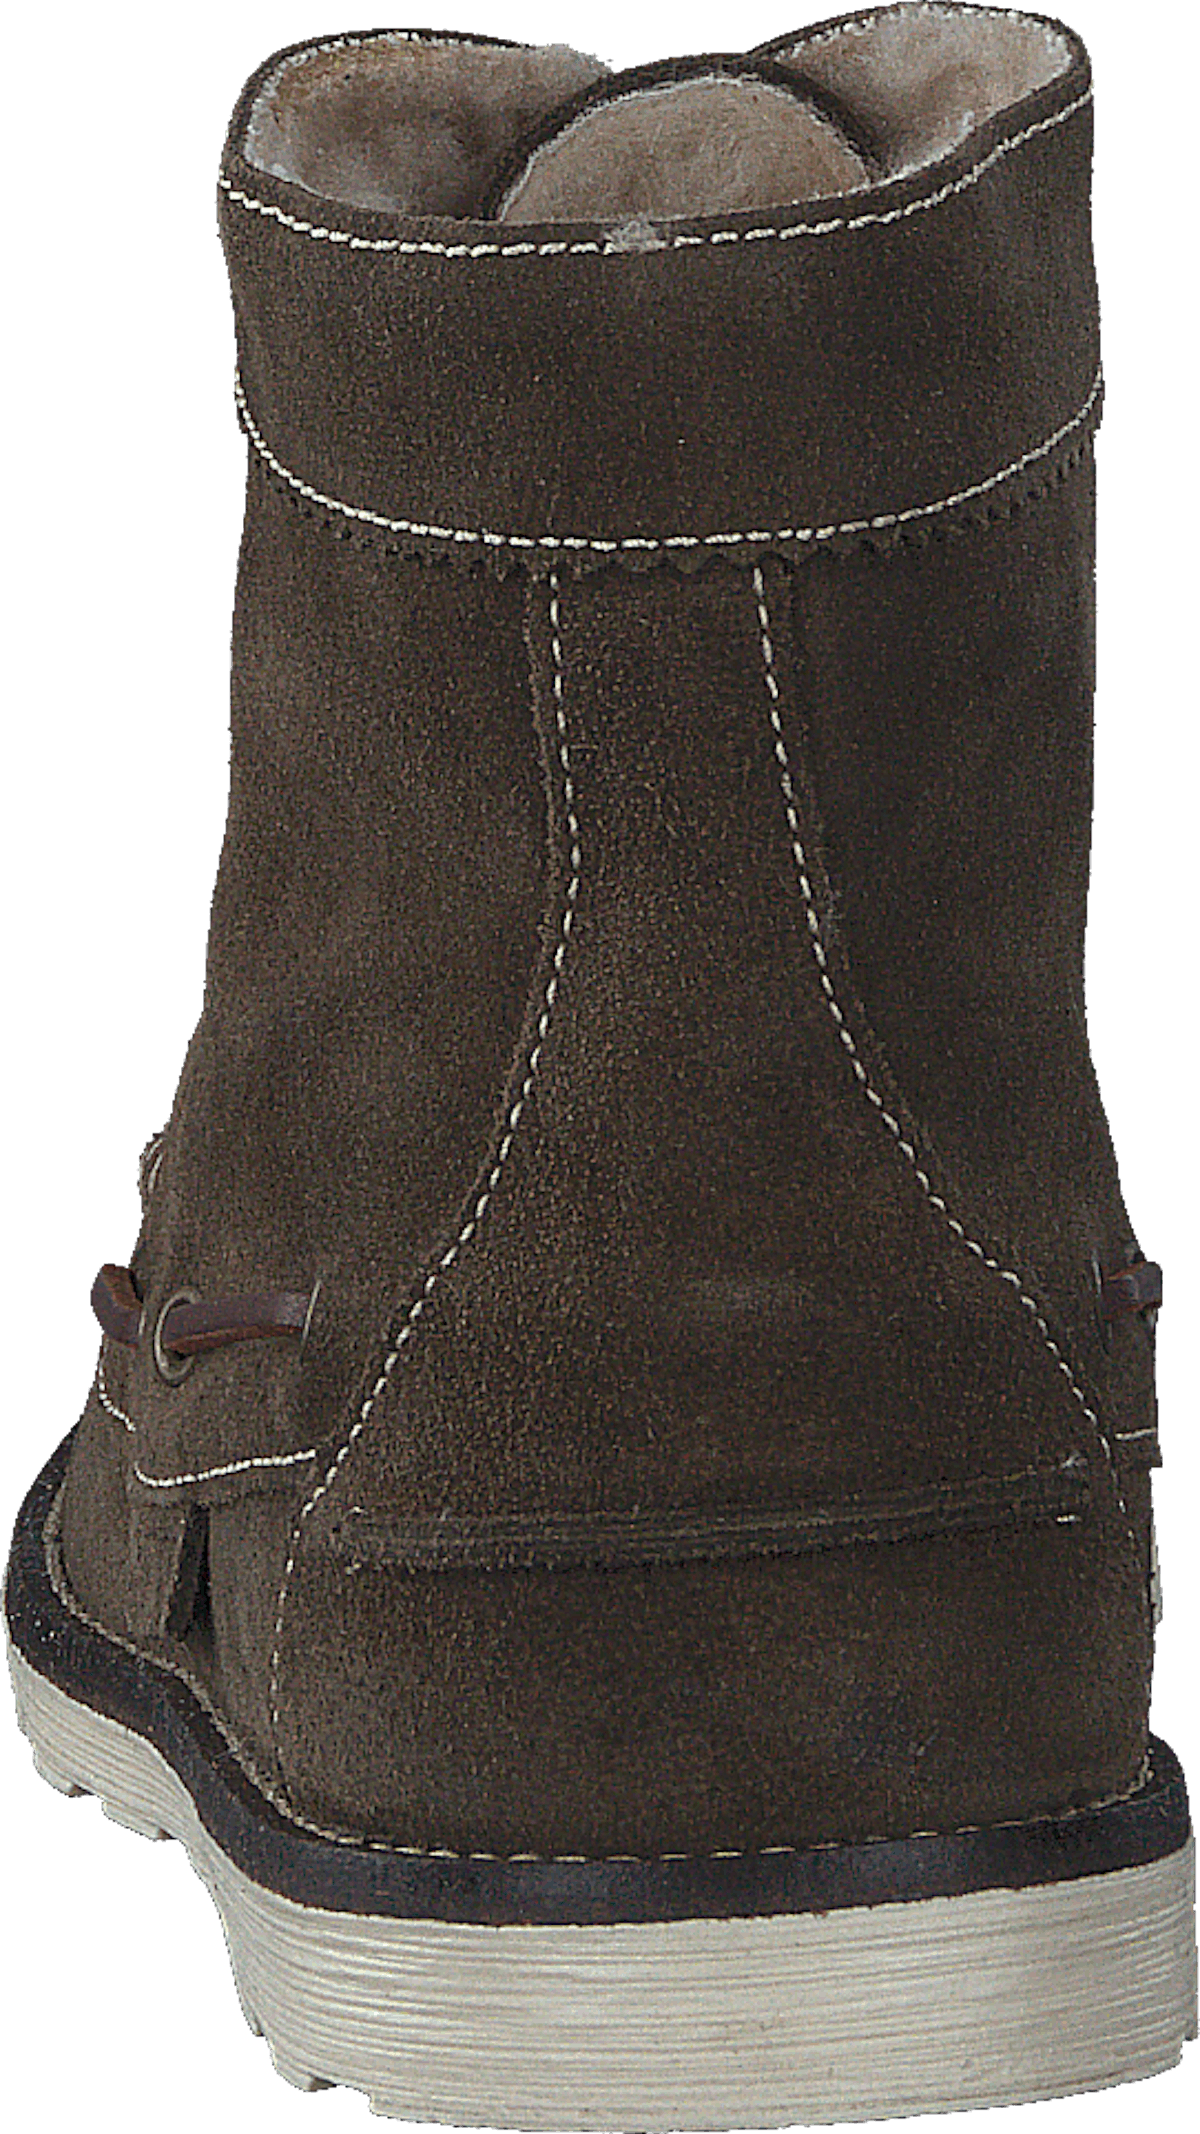 New Suede Sailor Boot